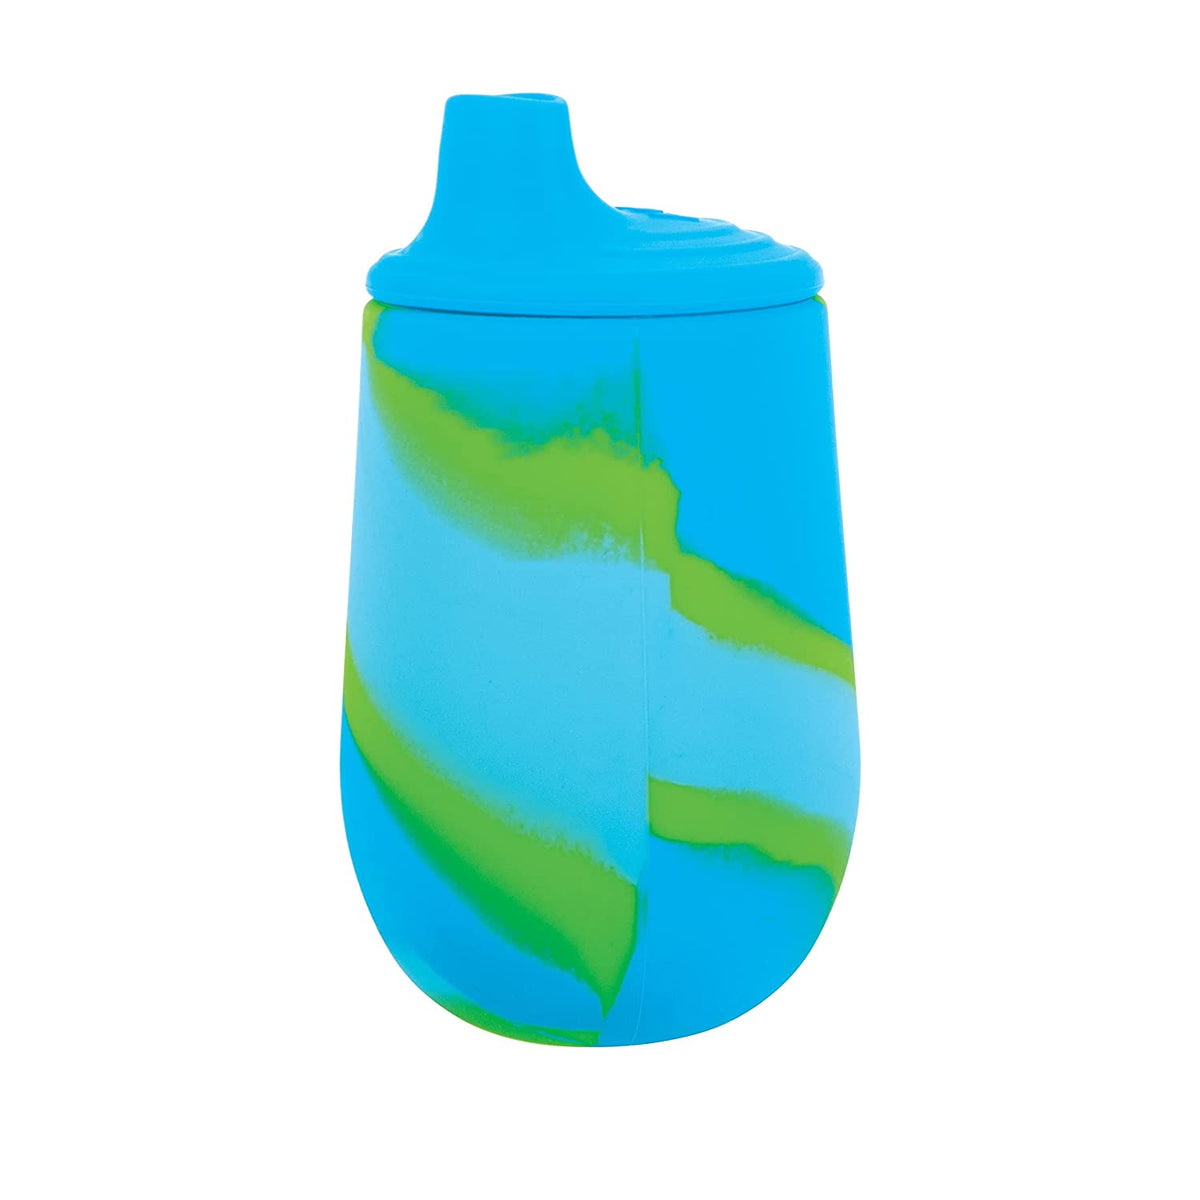  Nuby 2 Pack No Spill Cup, 10 Ounce, Blue - Green : Baby